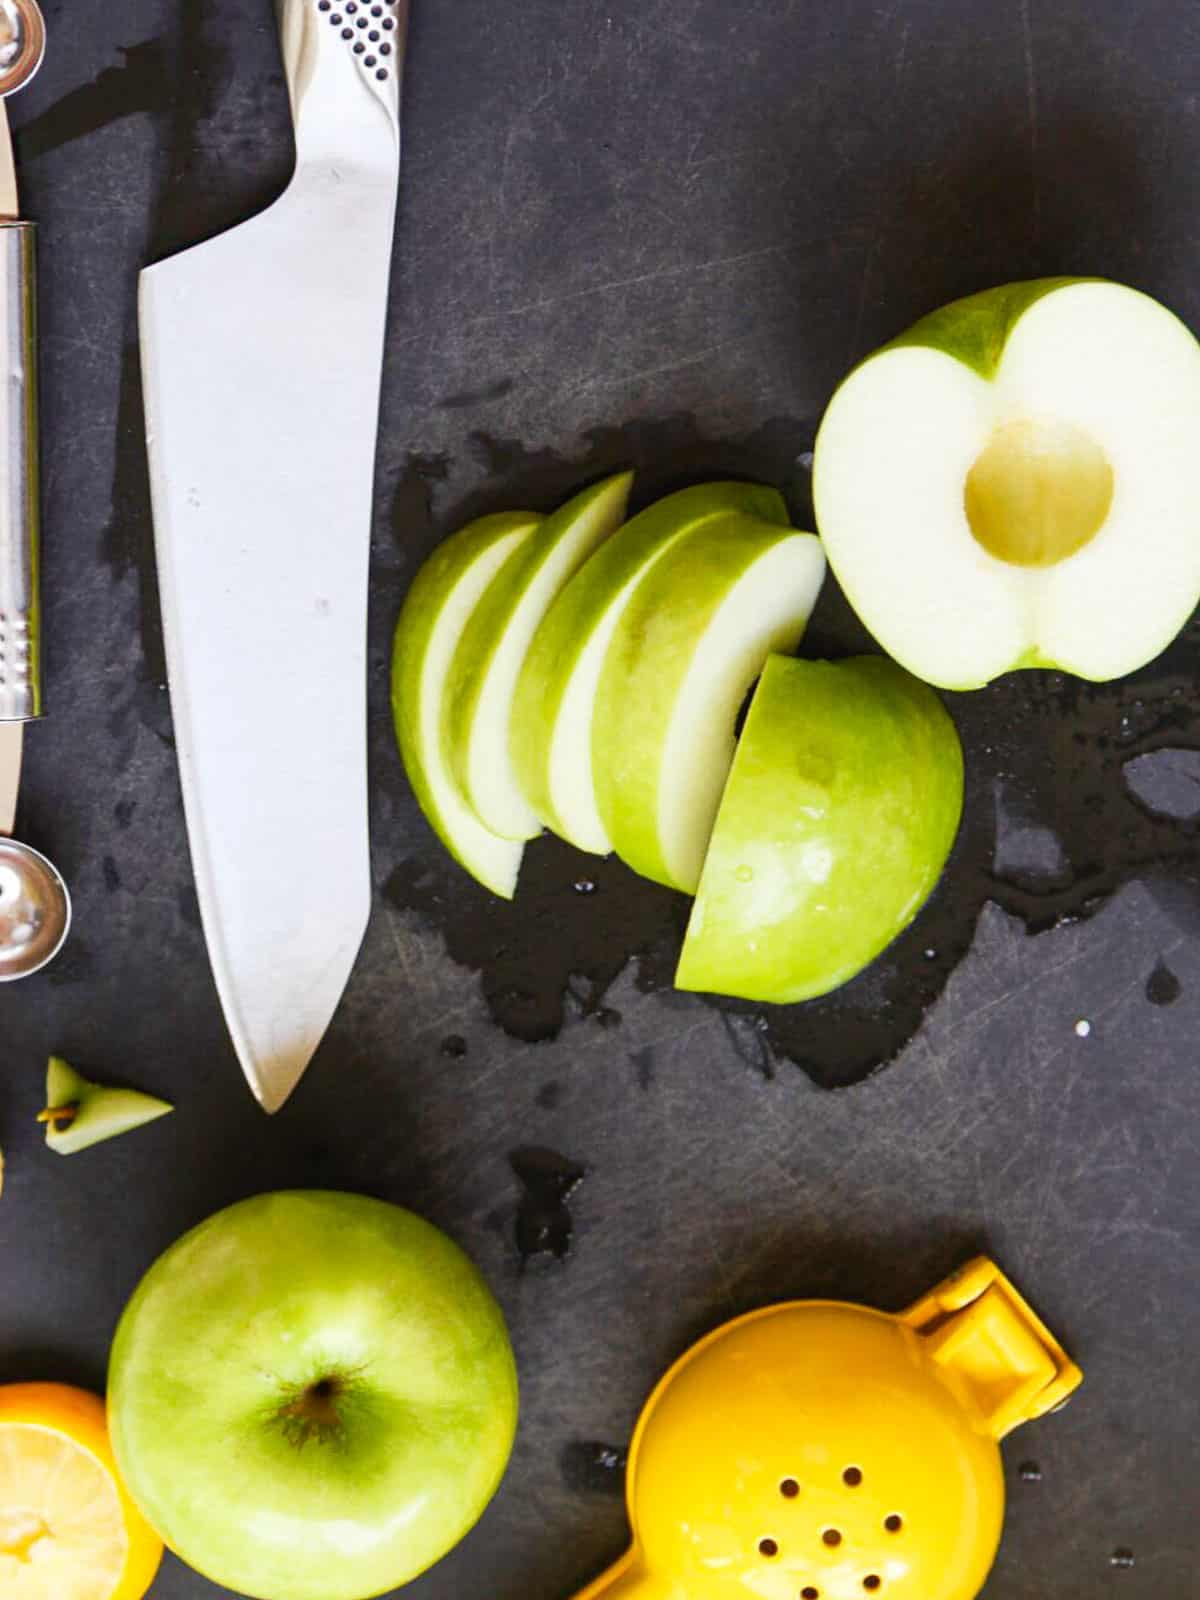 A cutting board and knife cutting apples for caramel apple dip.